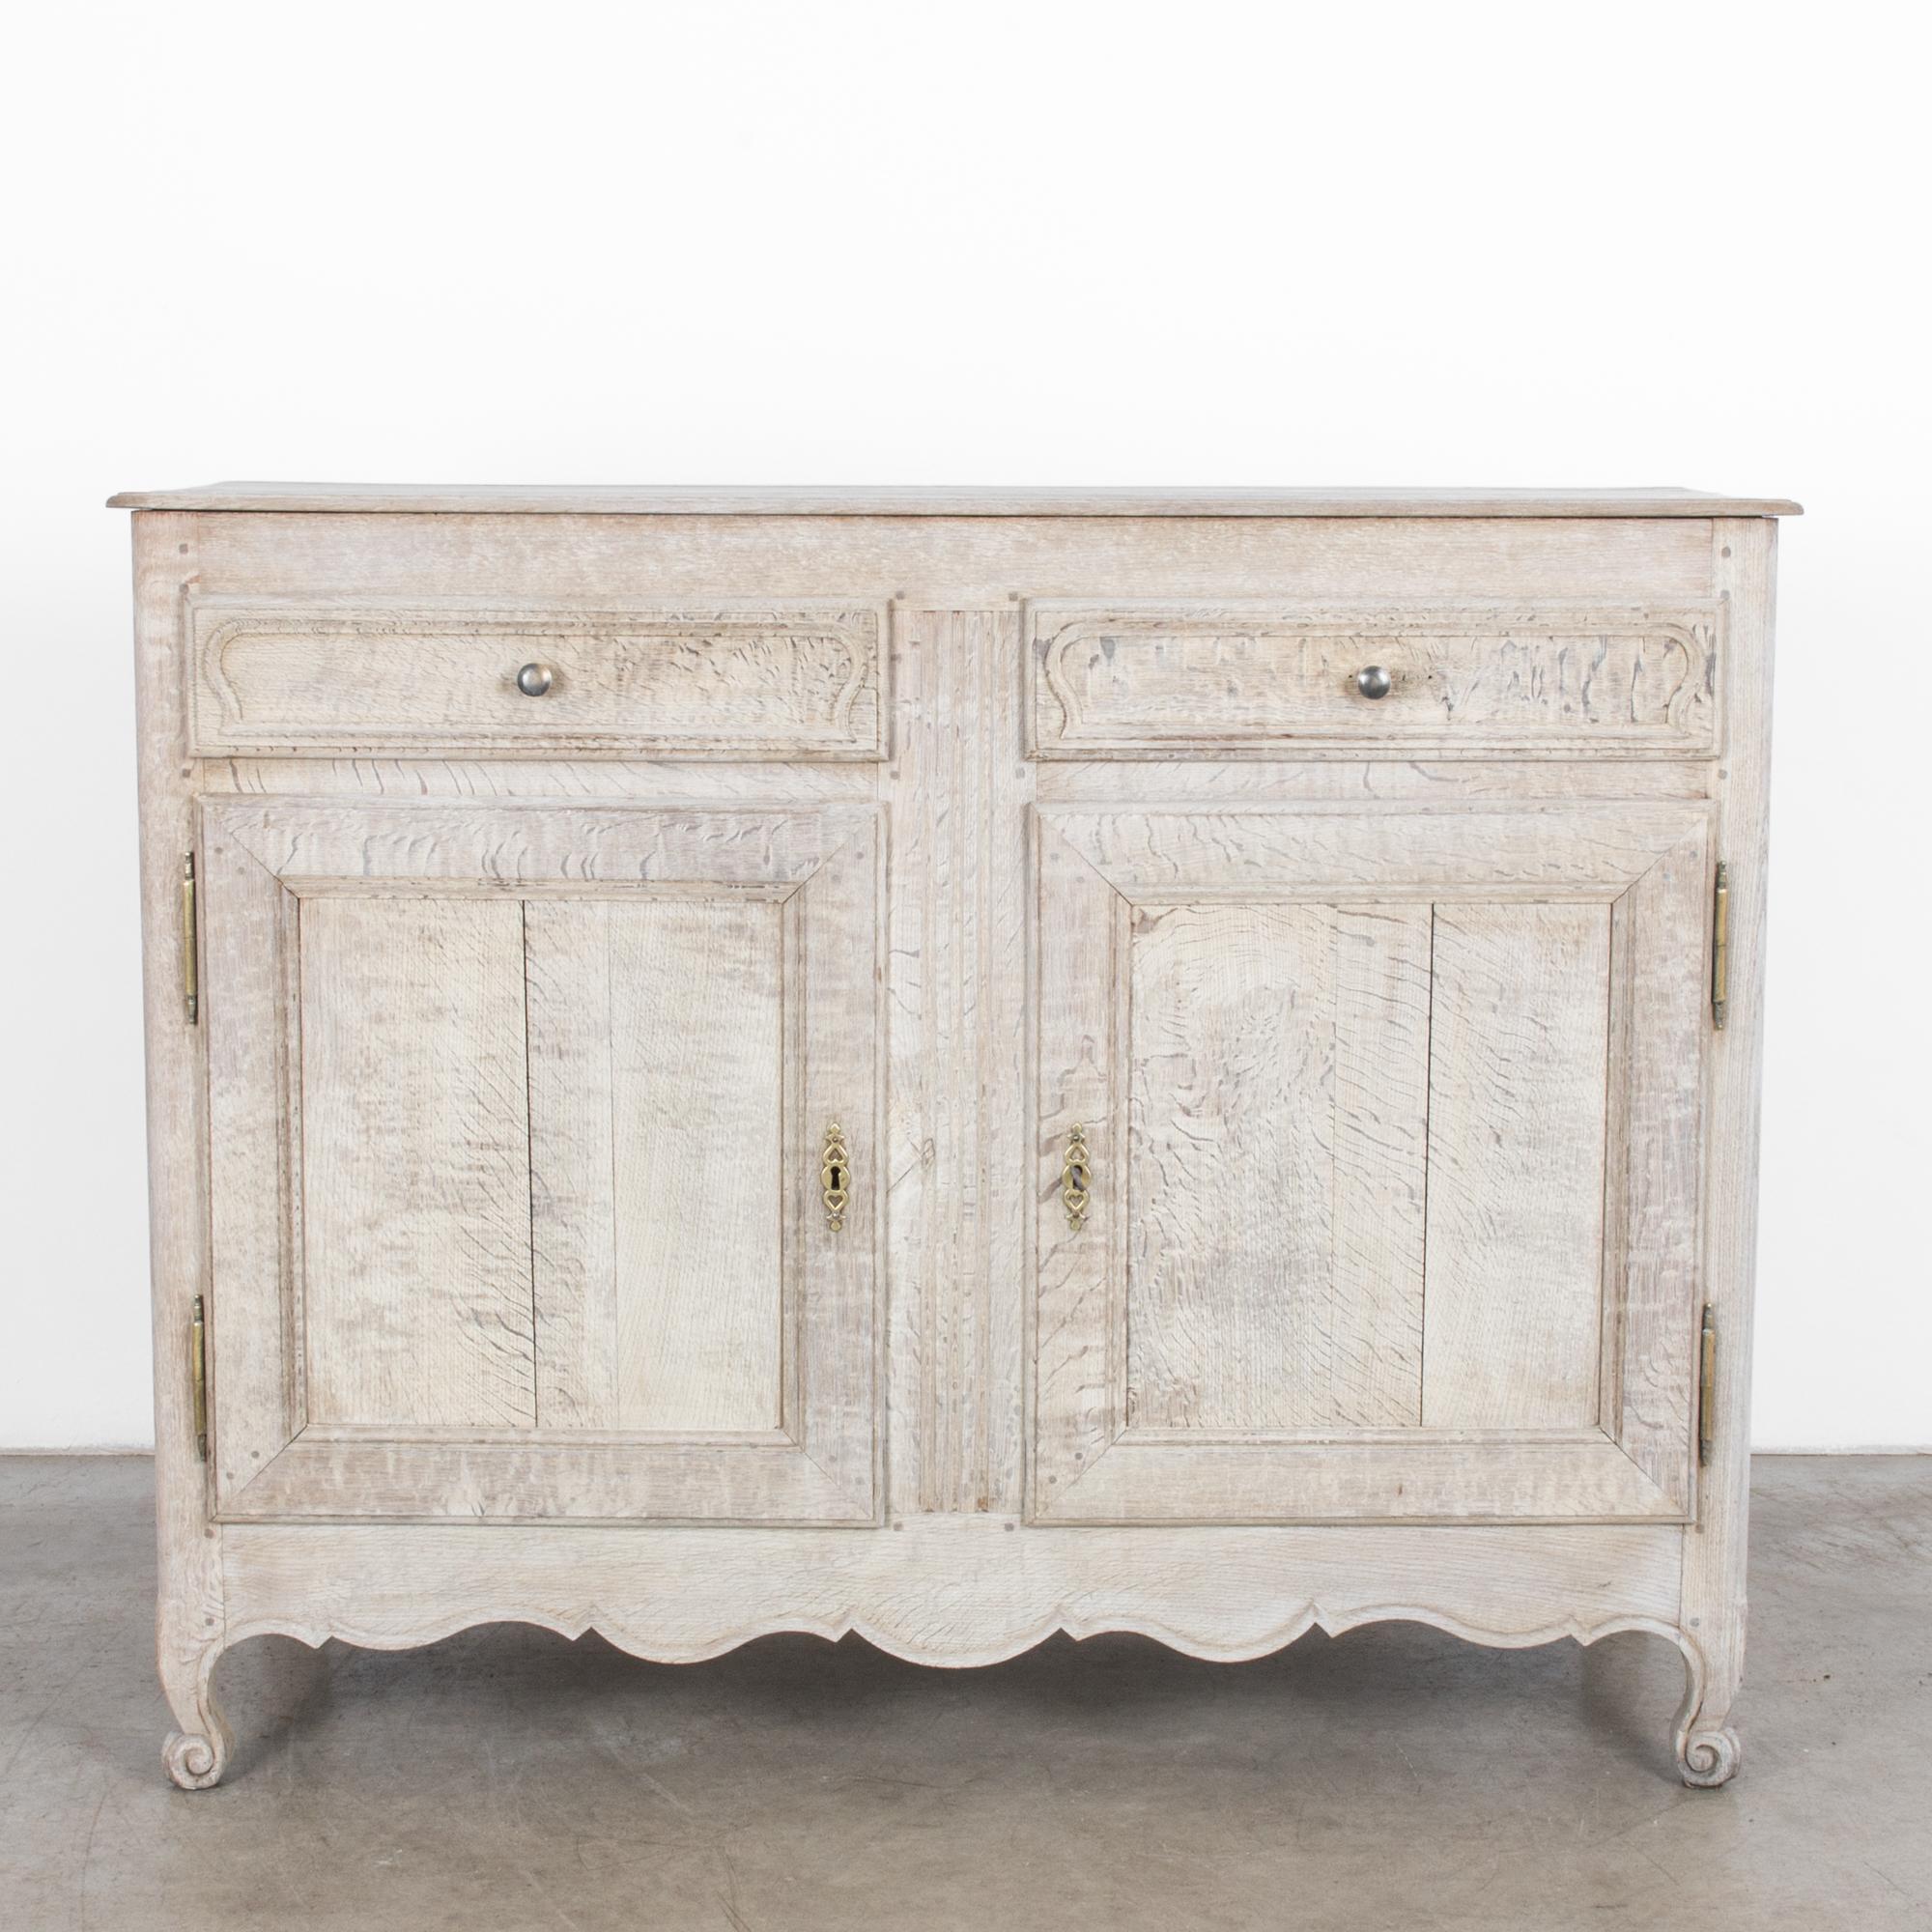 A bleached oak buffet from France, circa 1860. Two paneled doors open onto an interior shelf, above, twin drawers pull out with silver knobs. The curved paneling on the drawers echoes the elegant billows of the carved apron. Dainty scrolled feet